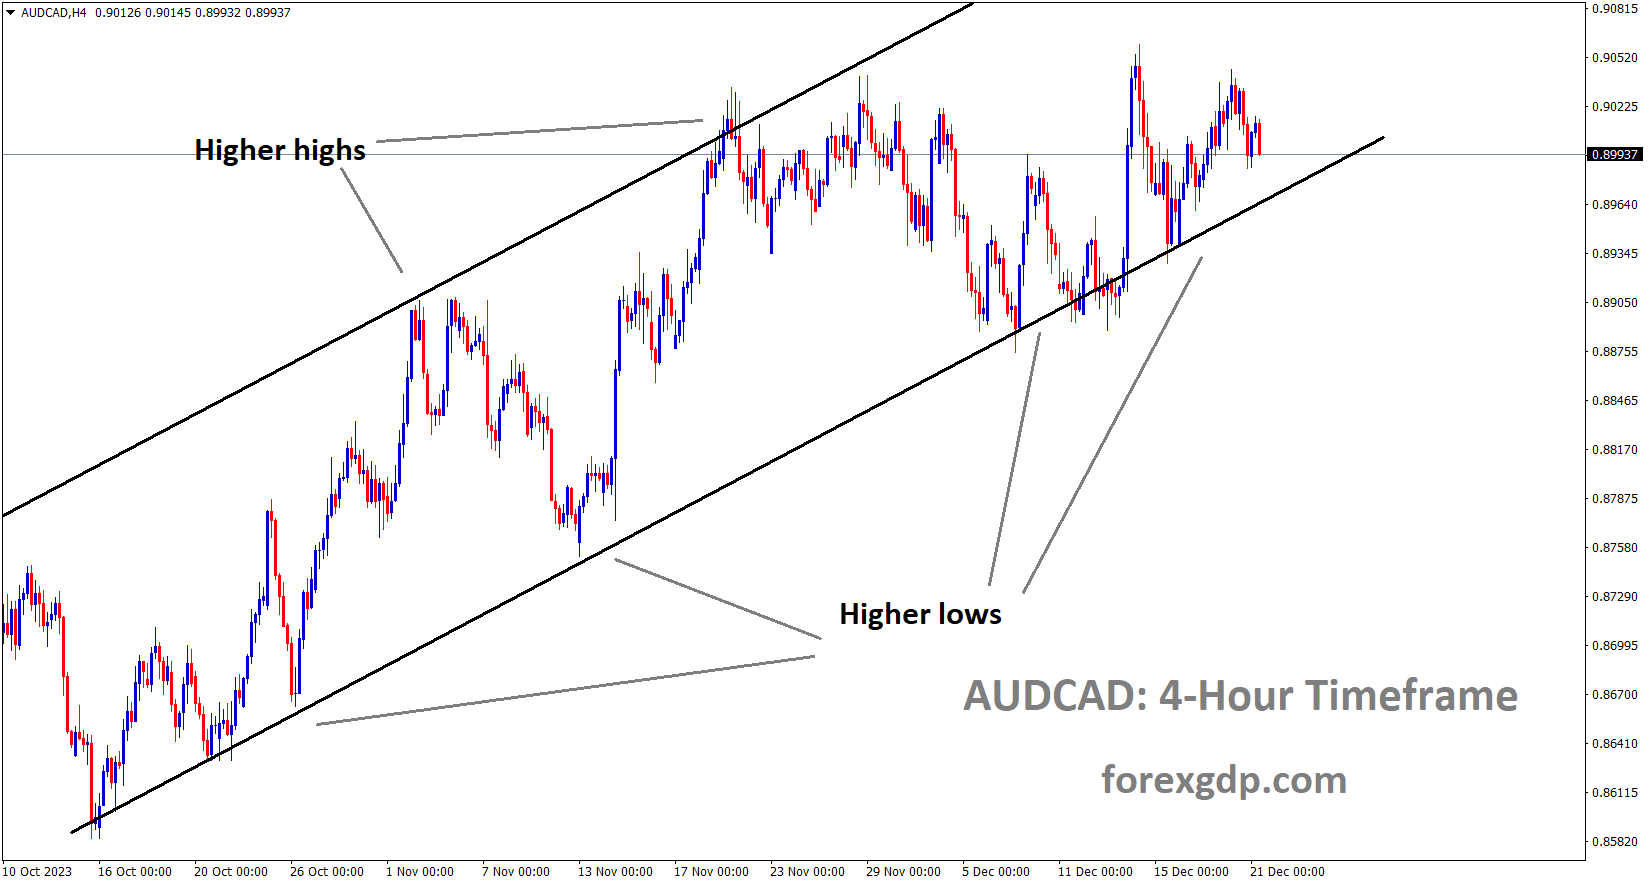 AUDCAD is moving in an Ascending channel and the market has reached the higher high area of the channel